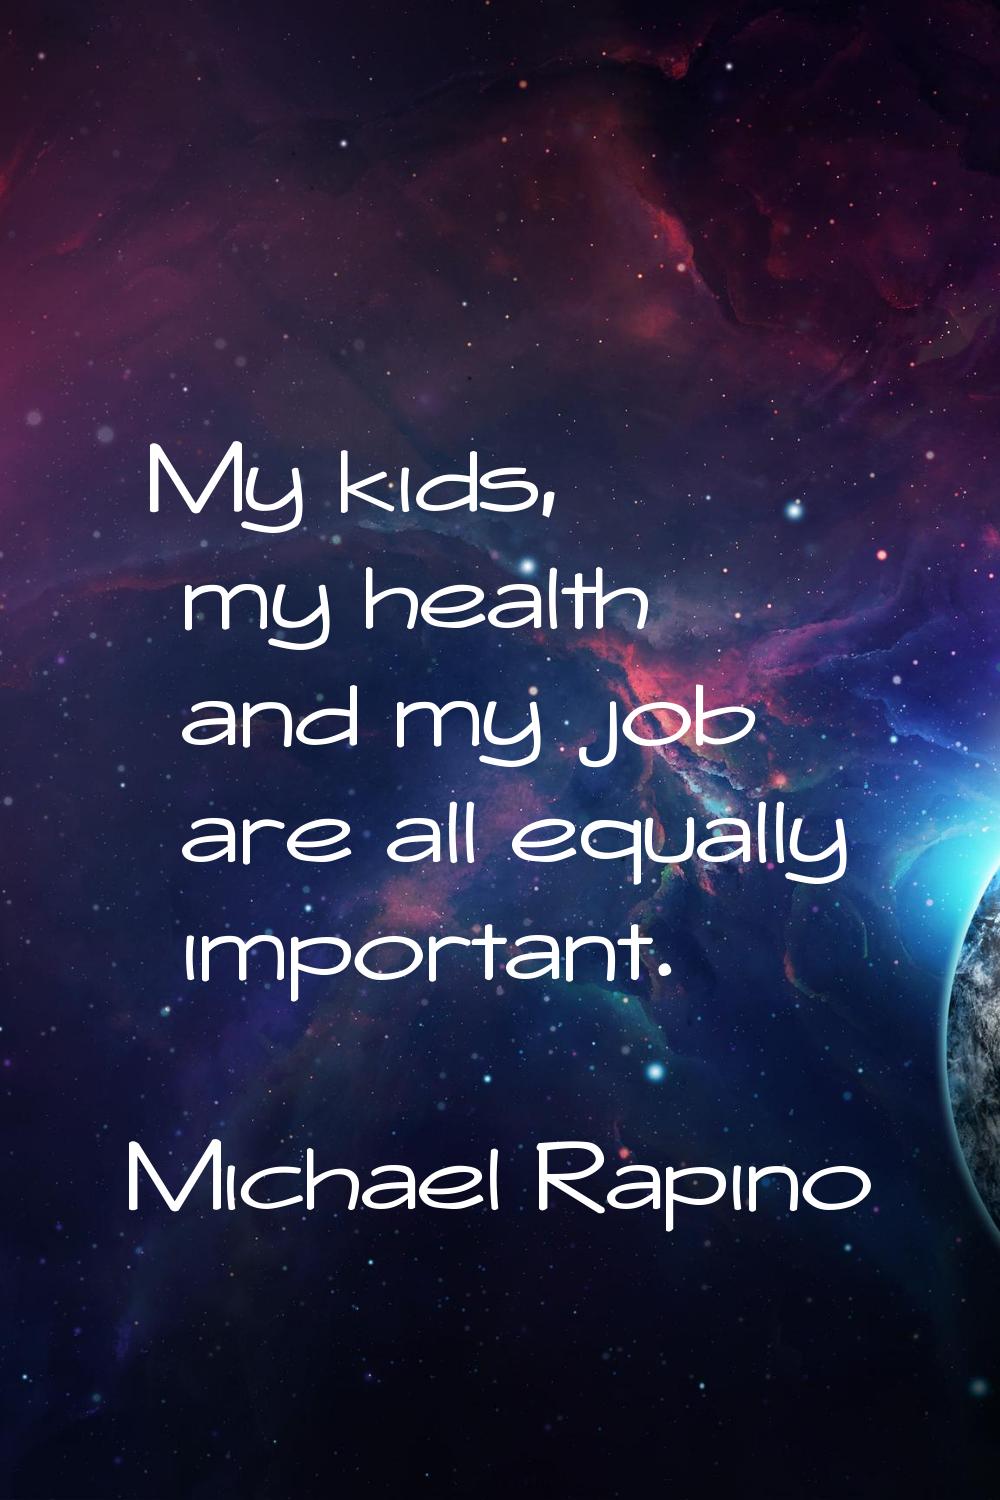 My kids, my health and my job are all equally important.